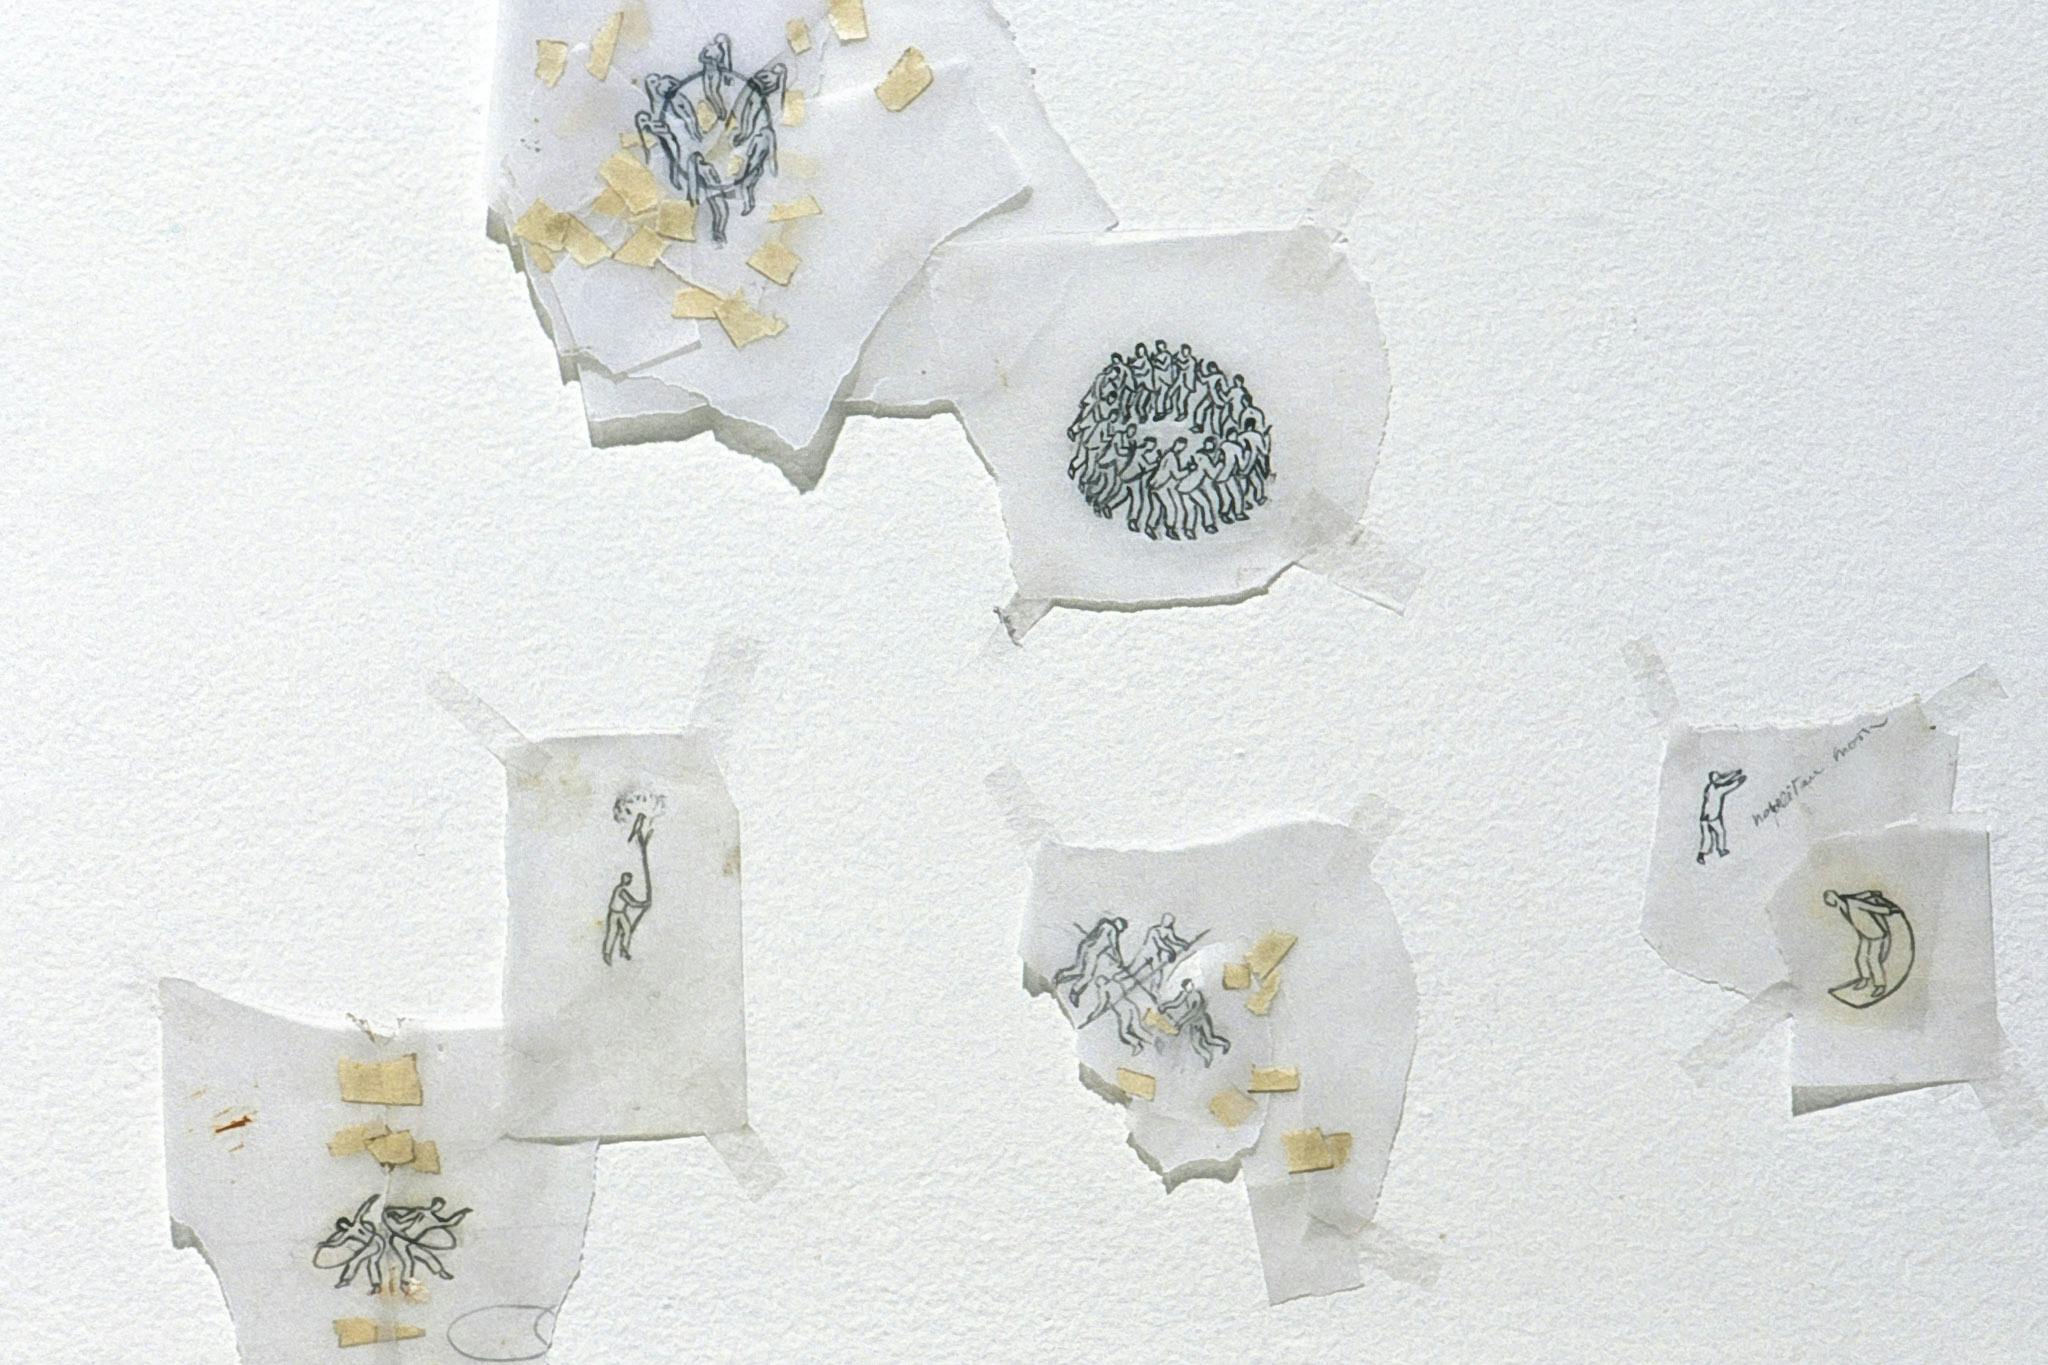 This is a close-up view of small drawings that are taped to the gallery wall. On the sheets of torn trace papers, black line drawings of various human figures and activities are depicted. 